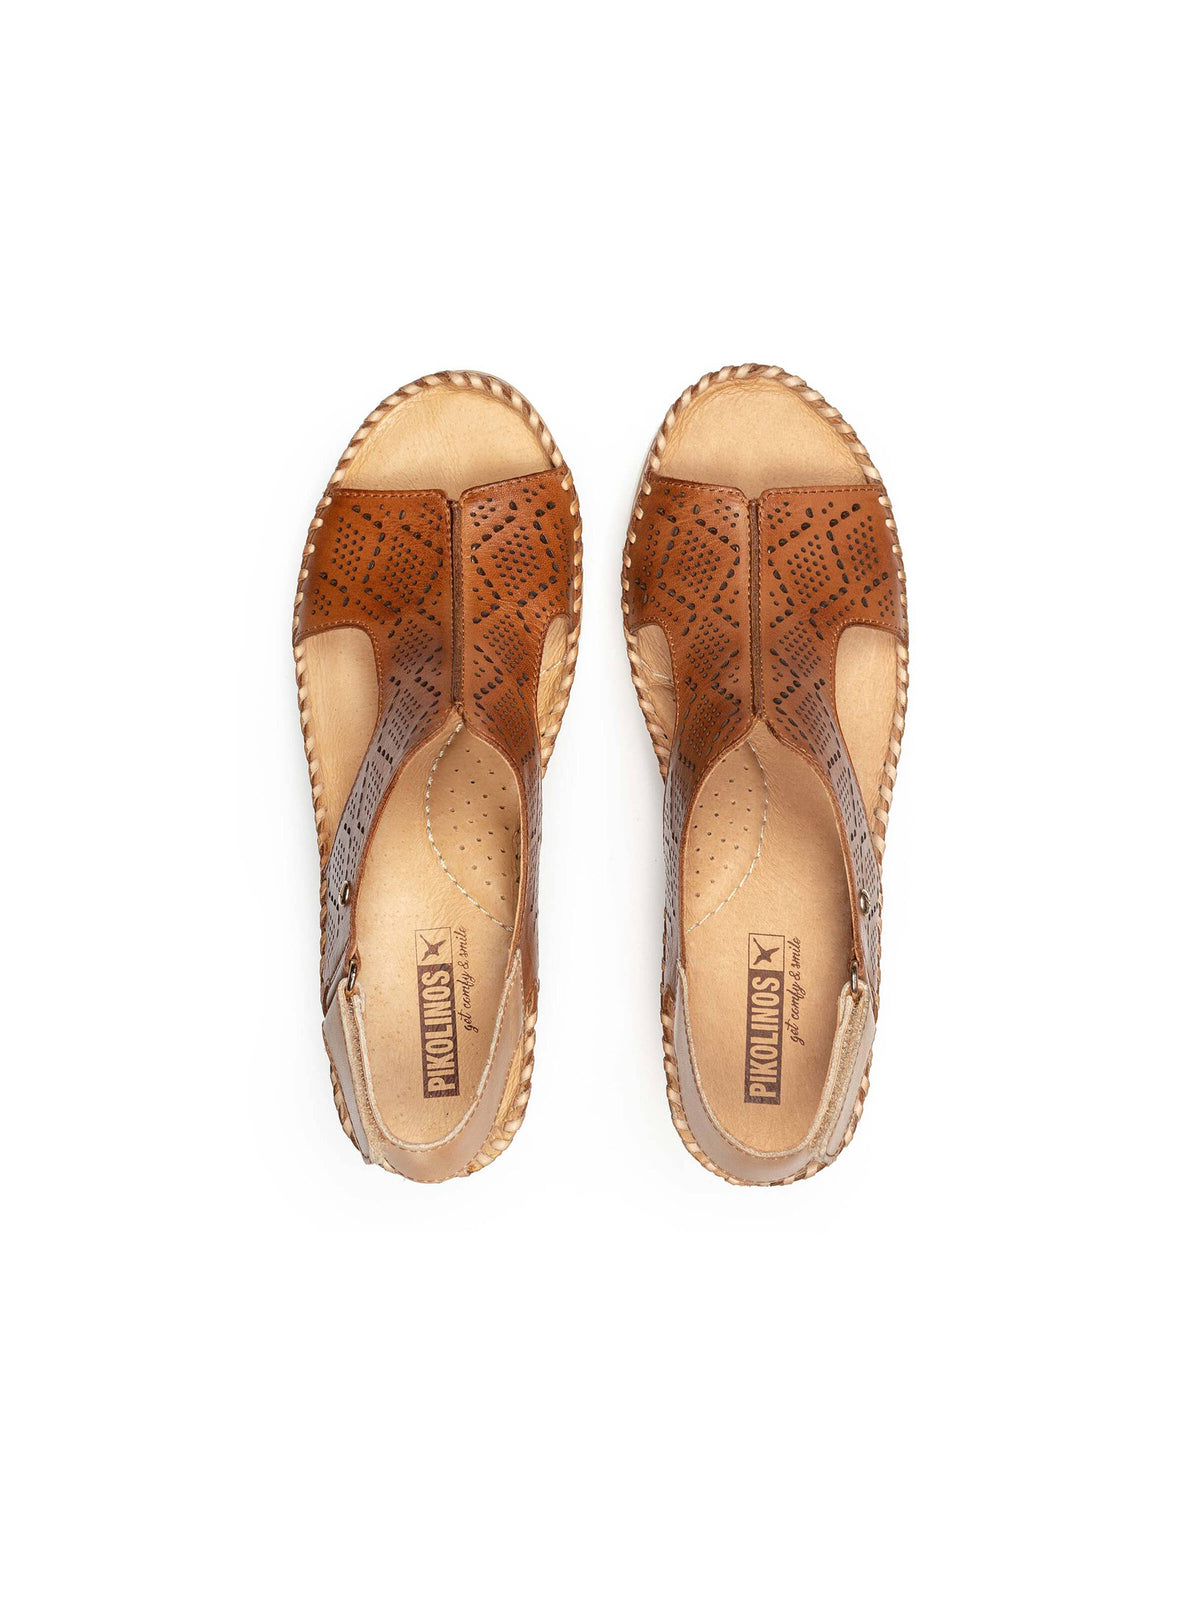 pikolinos aguadulce wedge sandals in brandy-top pair  view